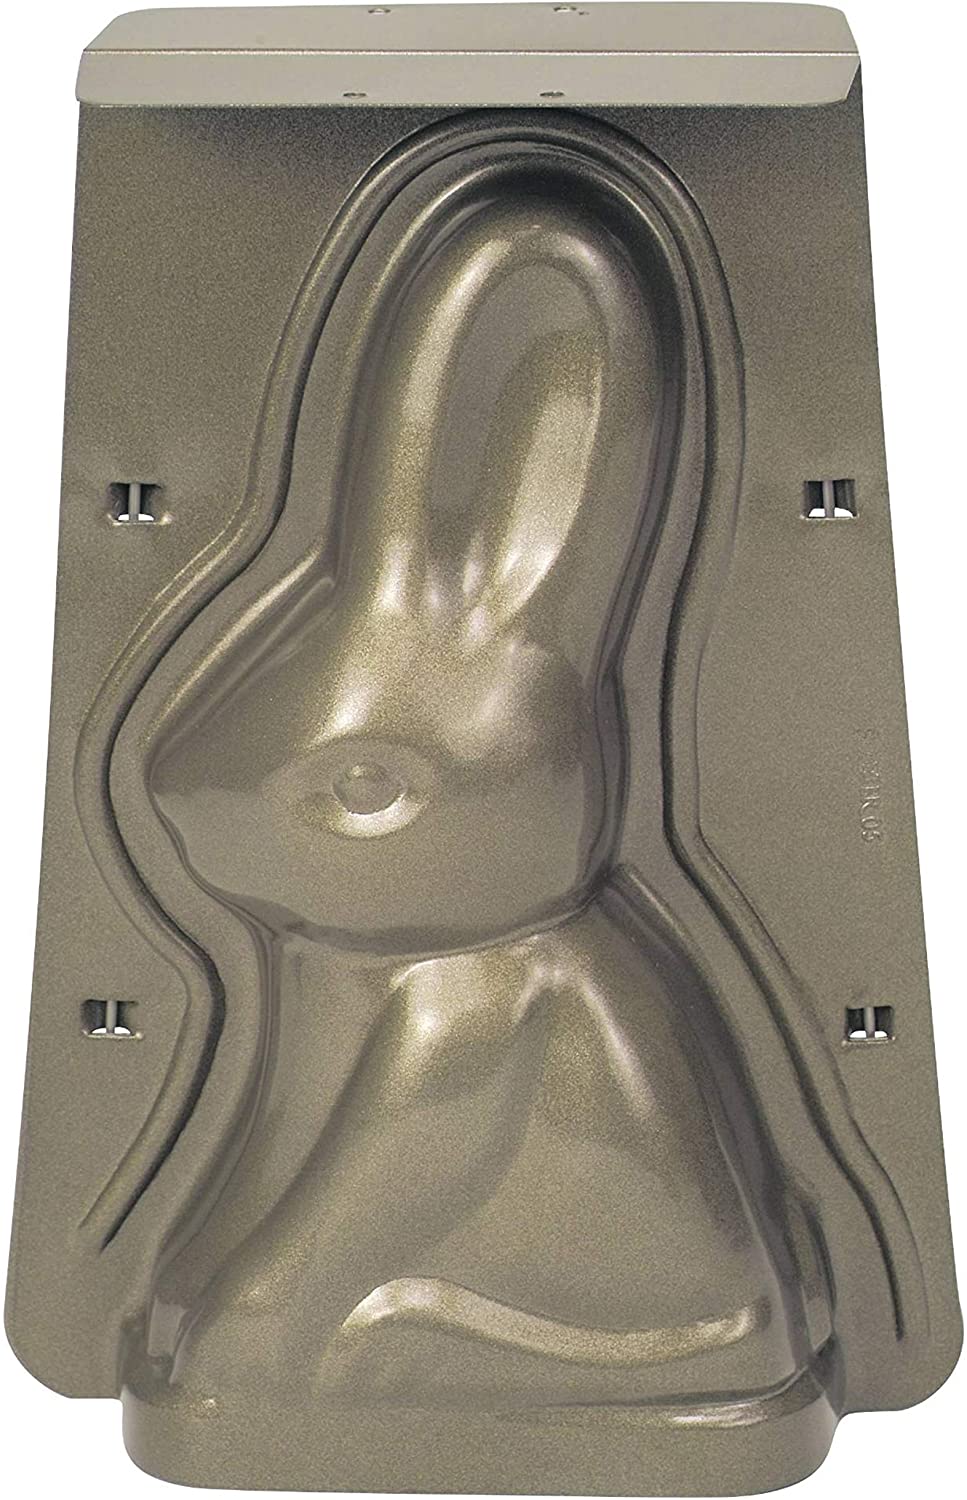 Staedter Städter Non-Stick Baking Tin – Easter Bunny, Set of 2